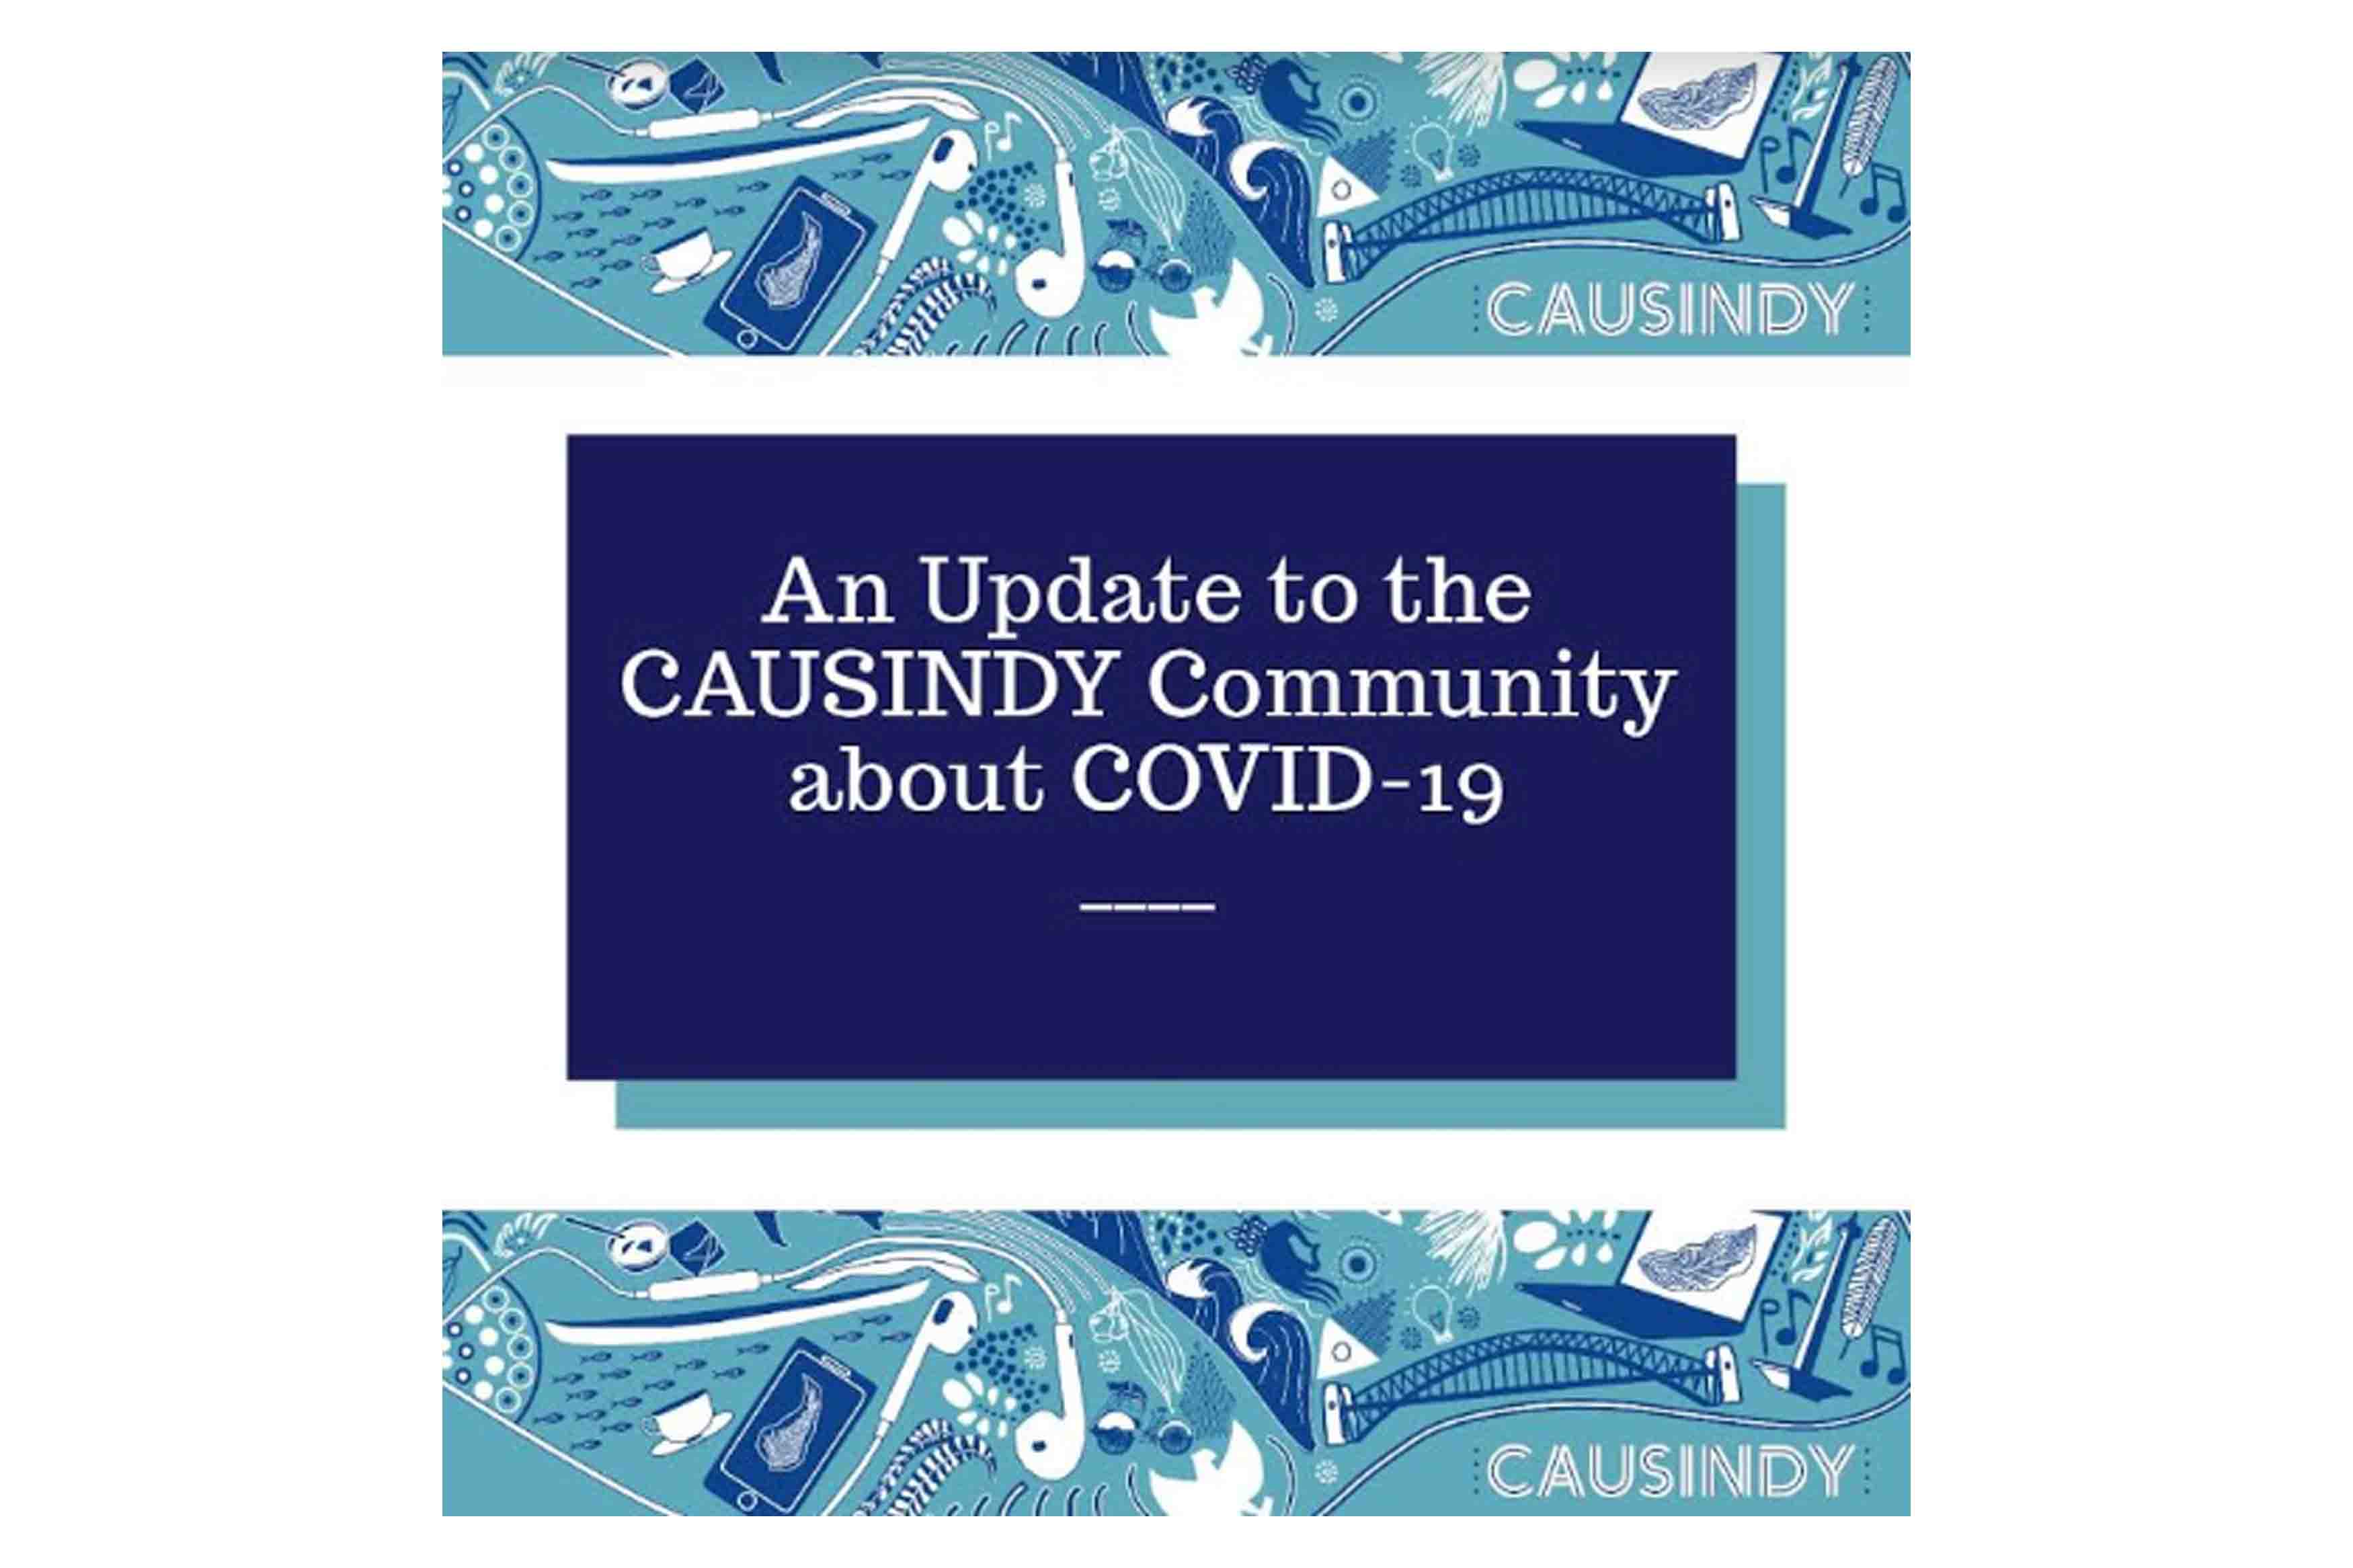 An Update on CAUSINDY and COVID-19